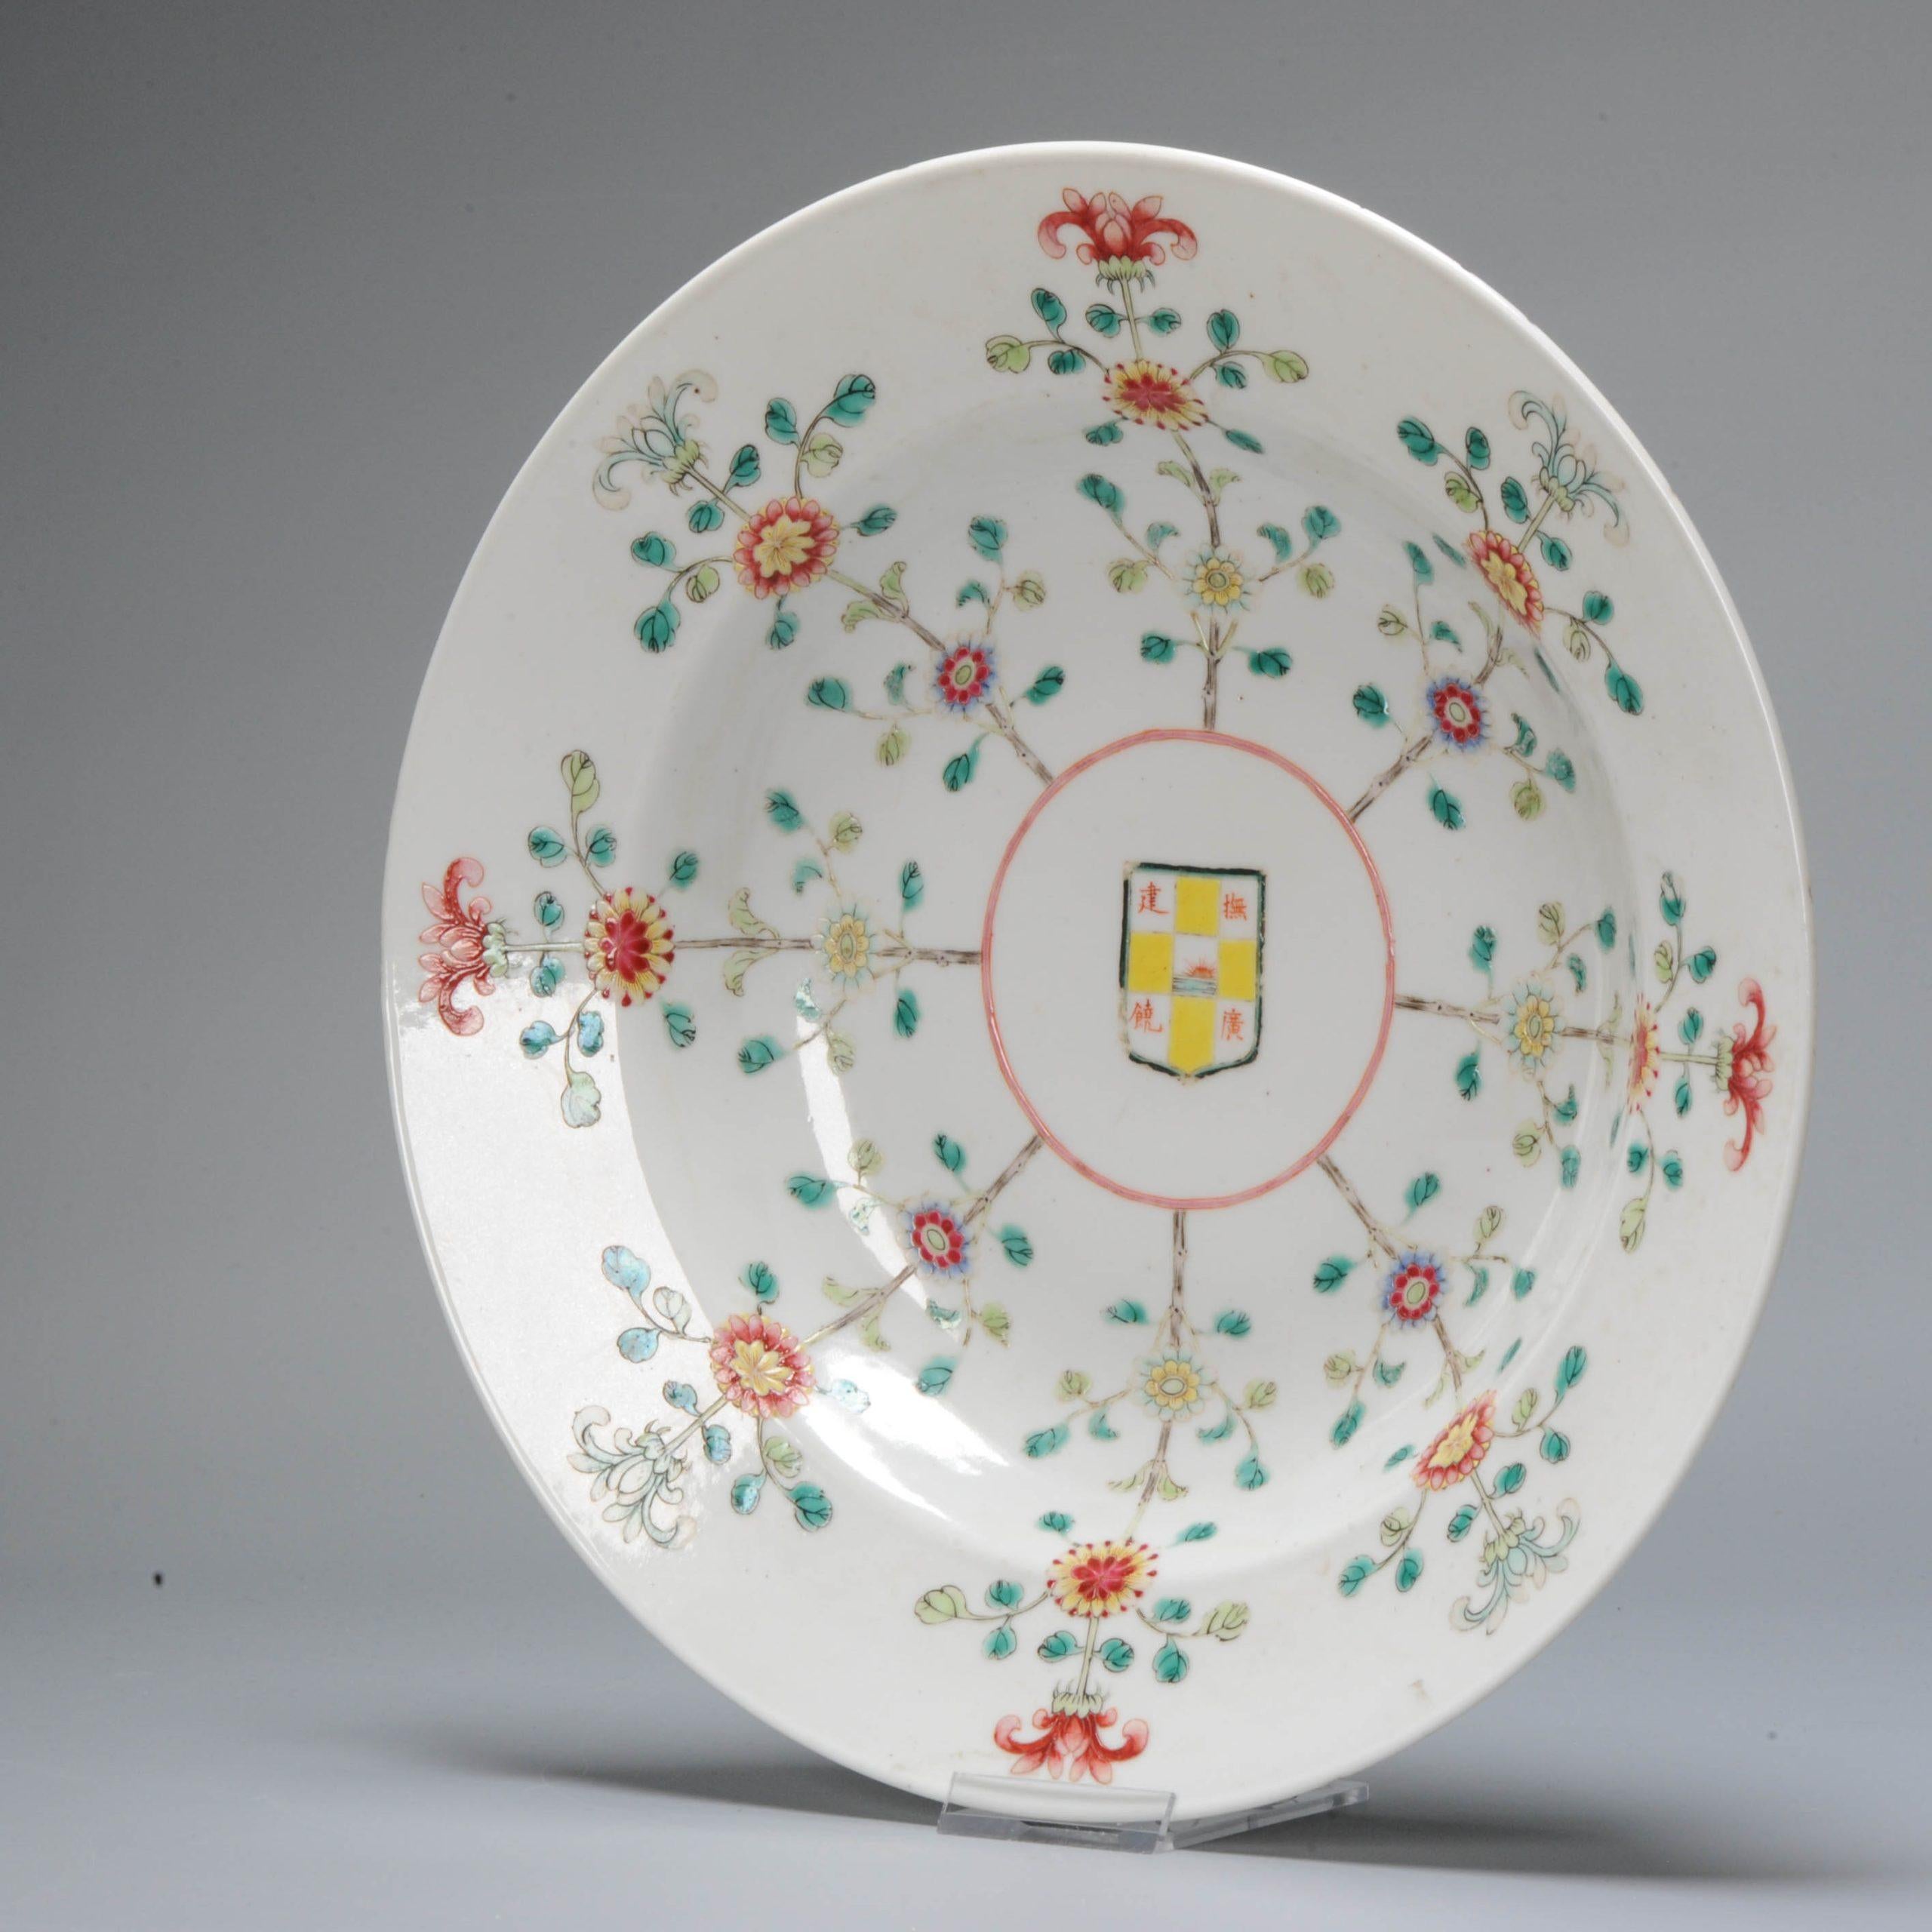 Lovely Guangxu/Xuantong period dish, unmarked at the base. Very high quality with flowers and central a shield with characters and central a rising sun.

According to the study of our friend, the dishes were a special order from a government in